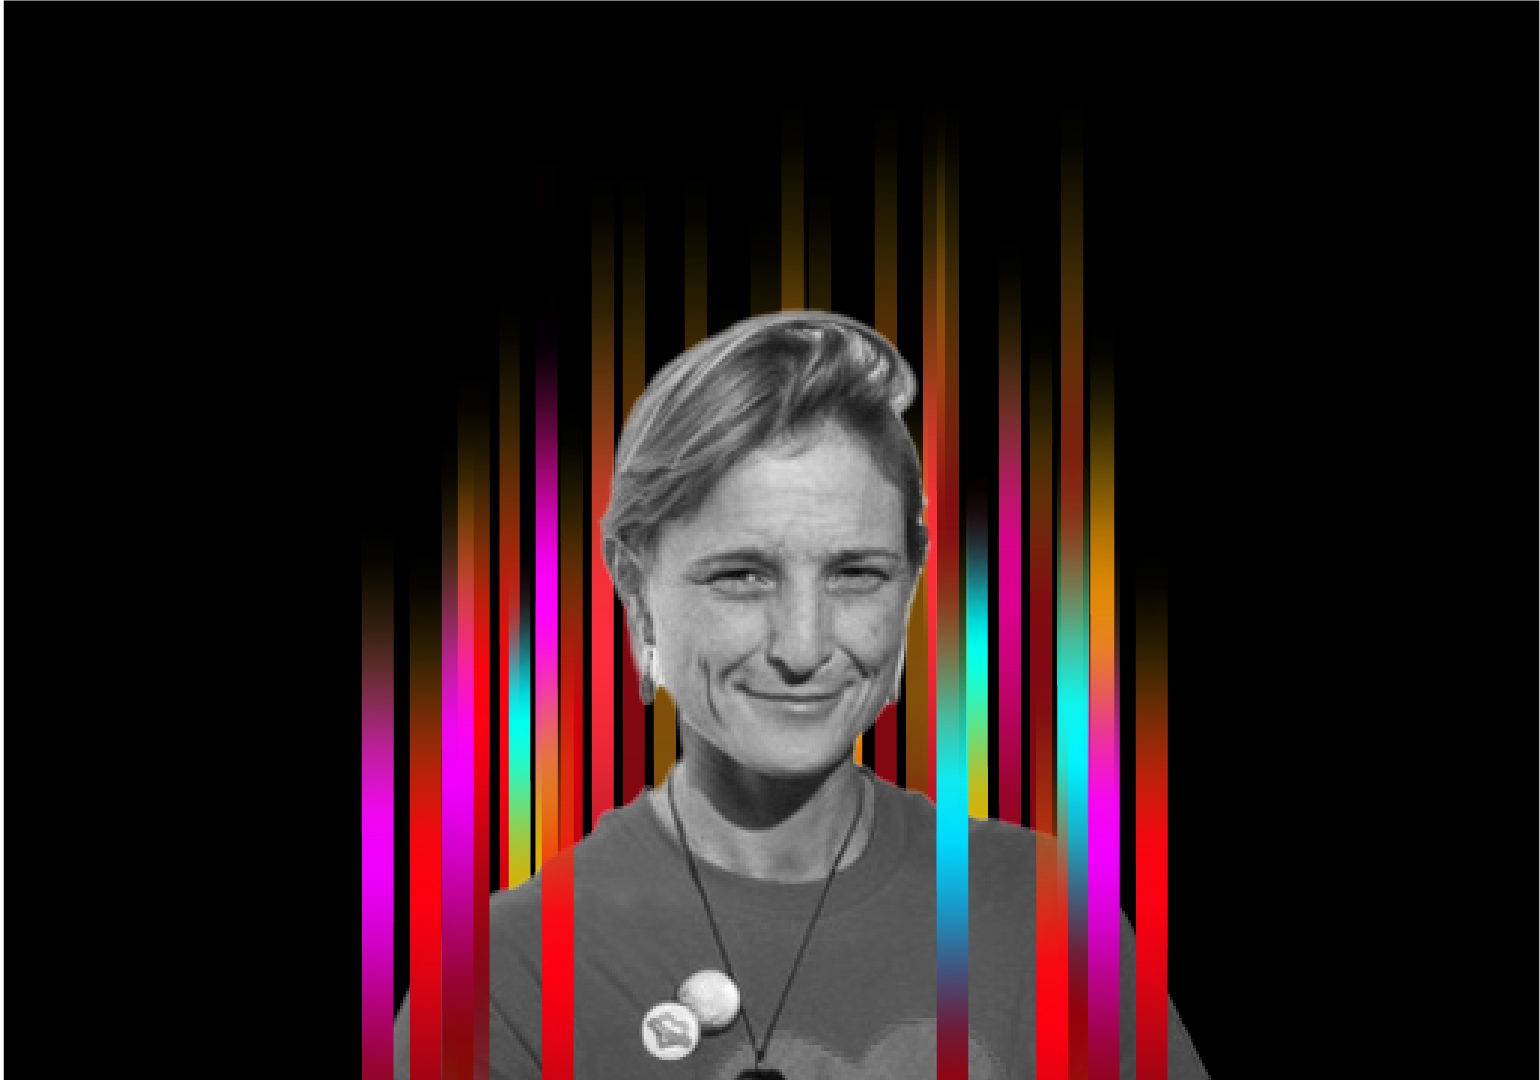 On the middle of a black background is a row of colourful vertical stripes’. In the centre is a black and white profile photo of TEDx speaker Sophie Lodge superimposed on top.